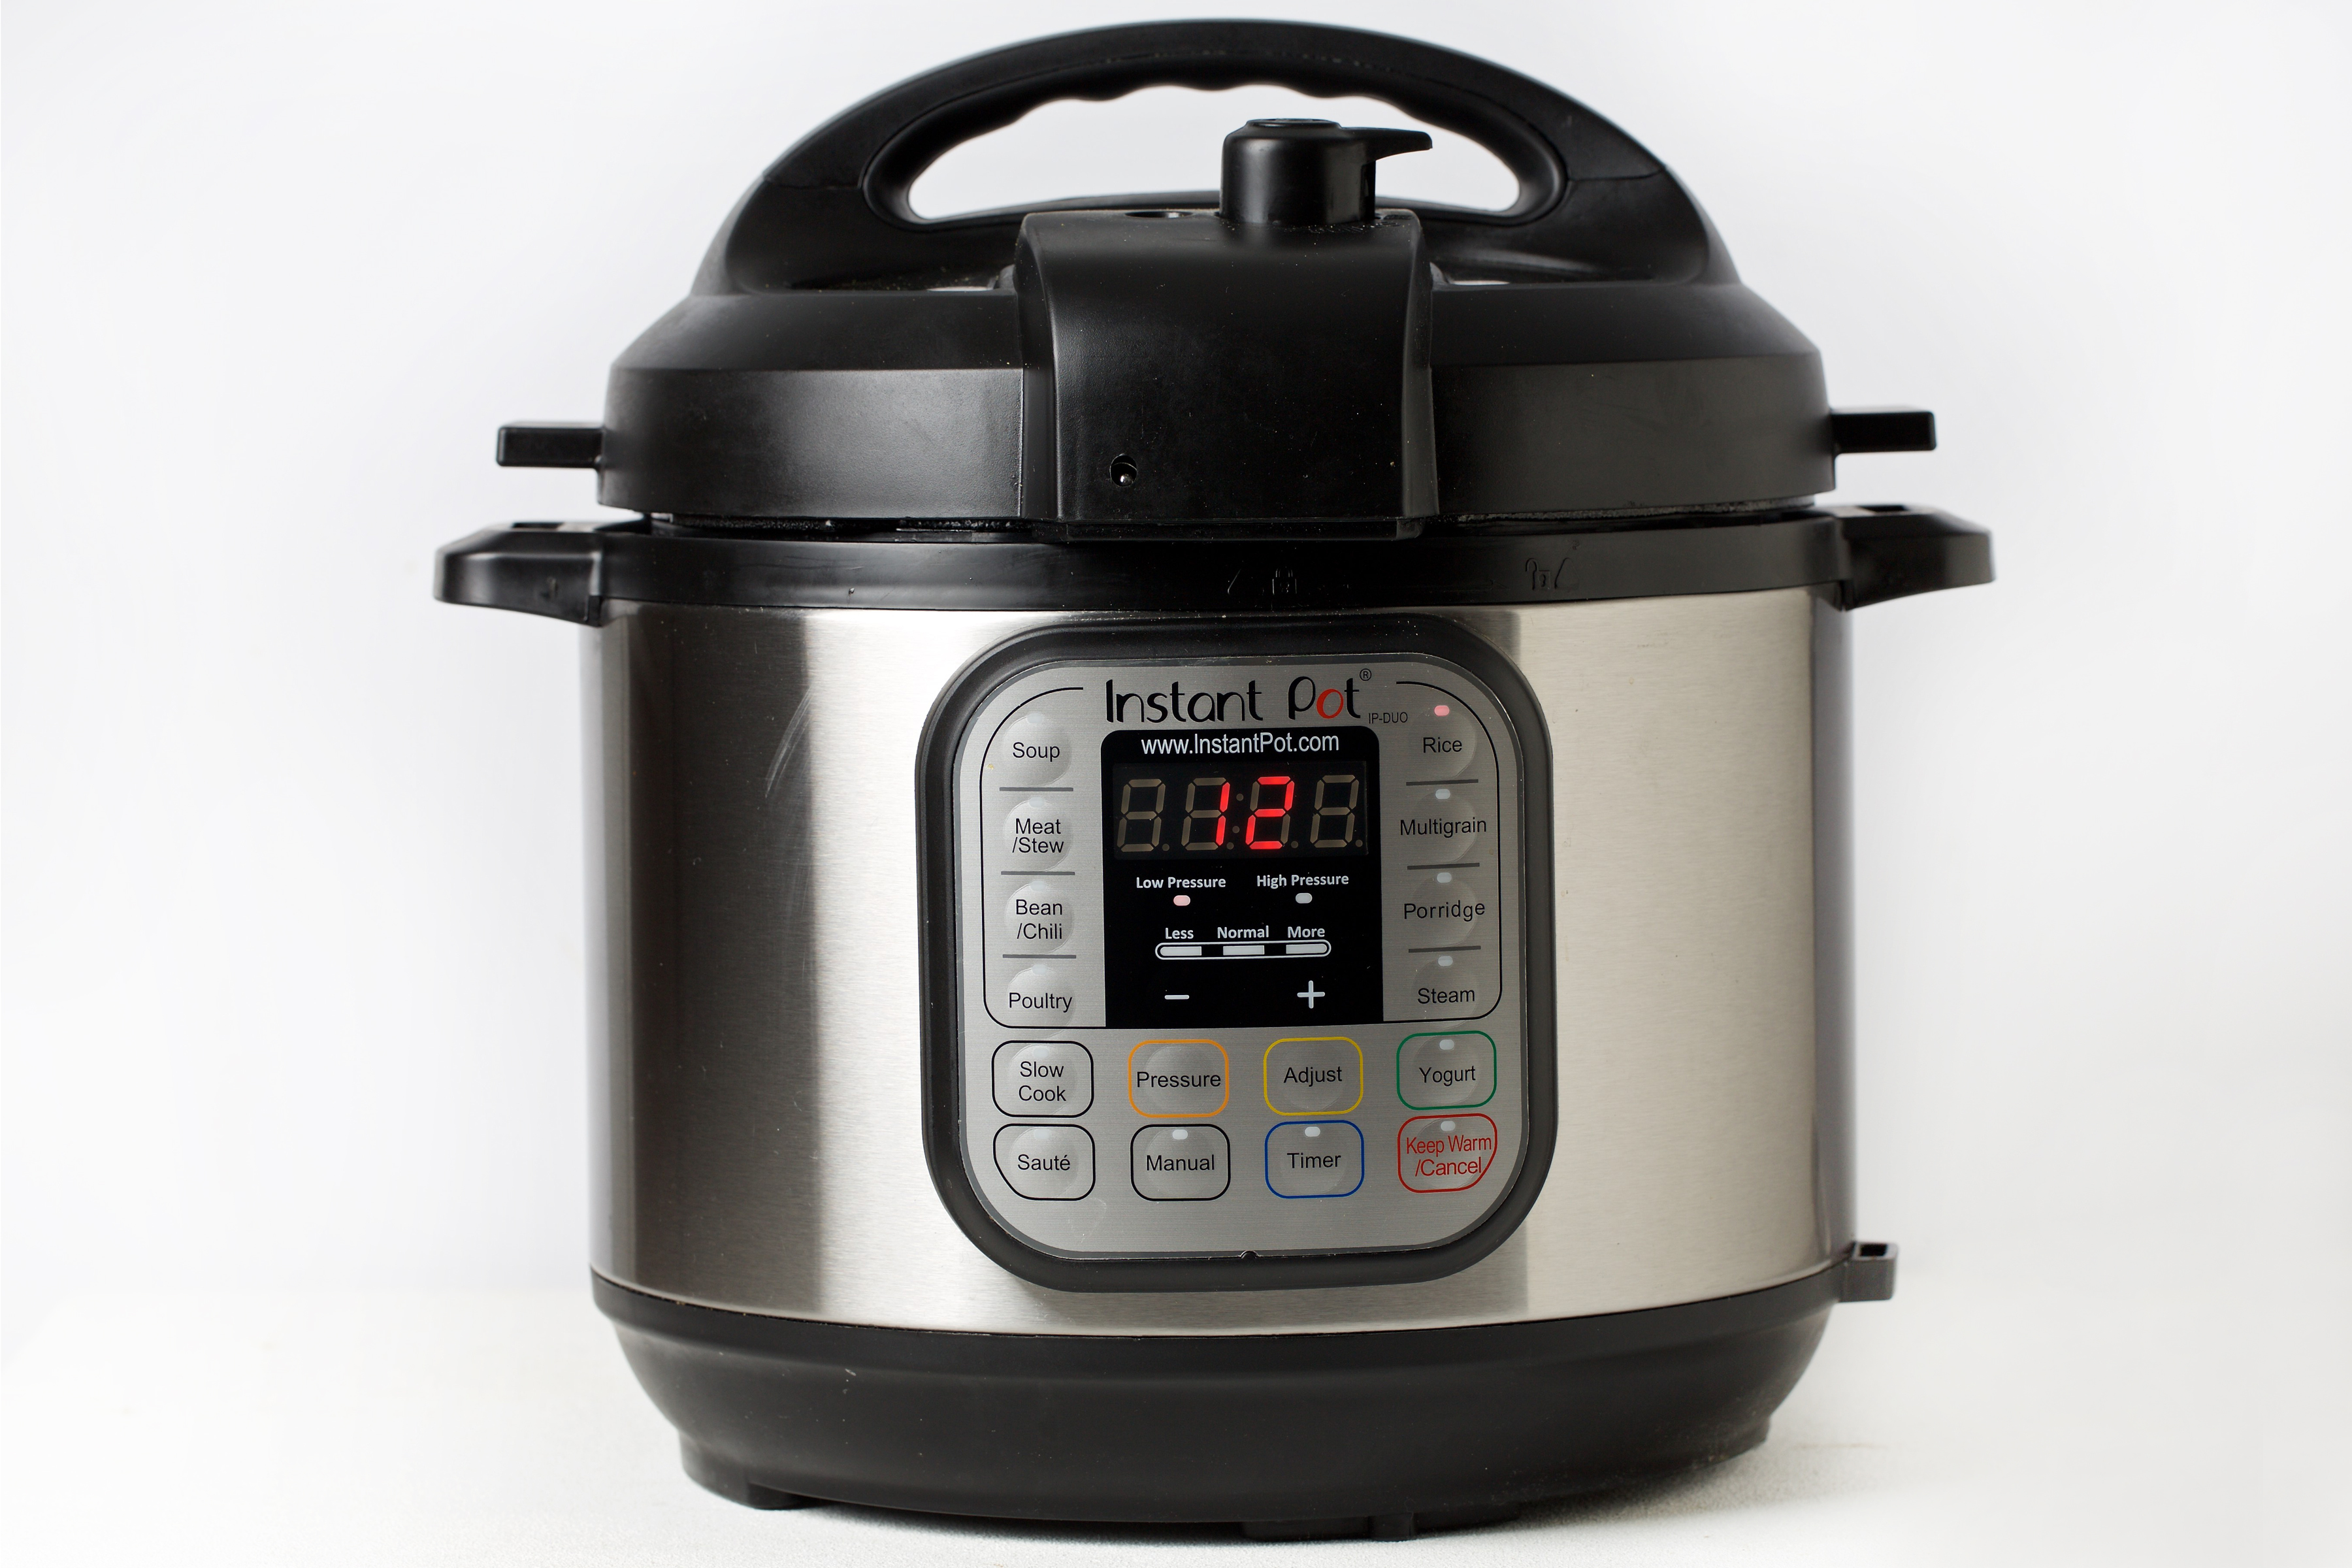 Your Instant Pot Could Get More Expensive Thanks to Trump's Trade War